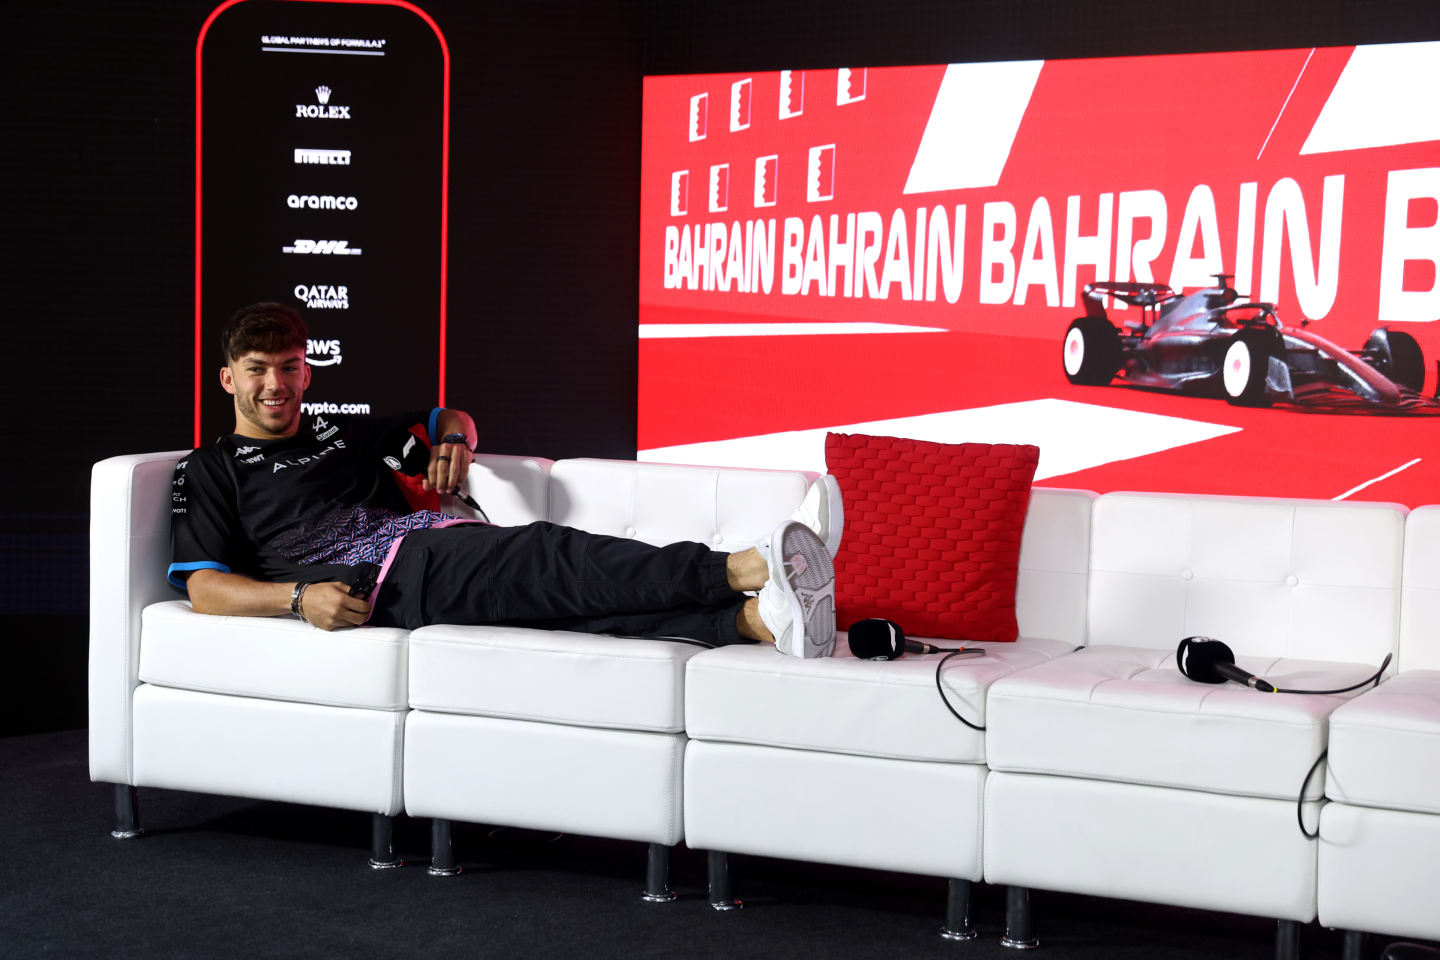 BAHRAIN, BAHRAIN - MARCH 02: Pierre Gasly of France and Alpine F1 attends the Drivers Press Conference during previews ahead of the F1 Grand Prix of Bahrain at Bahrain International Circuit on March 02, 2023 in Bahrain, Bahrain. (Photo by Lars Baron/Getty Images)